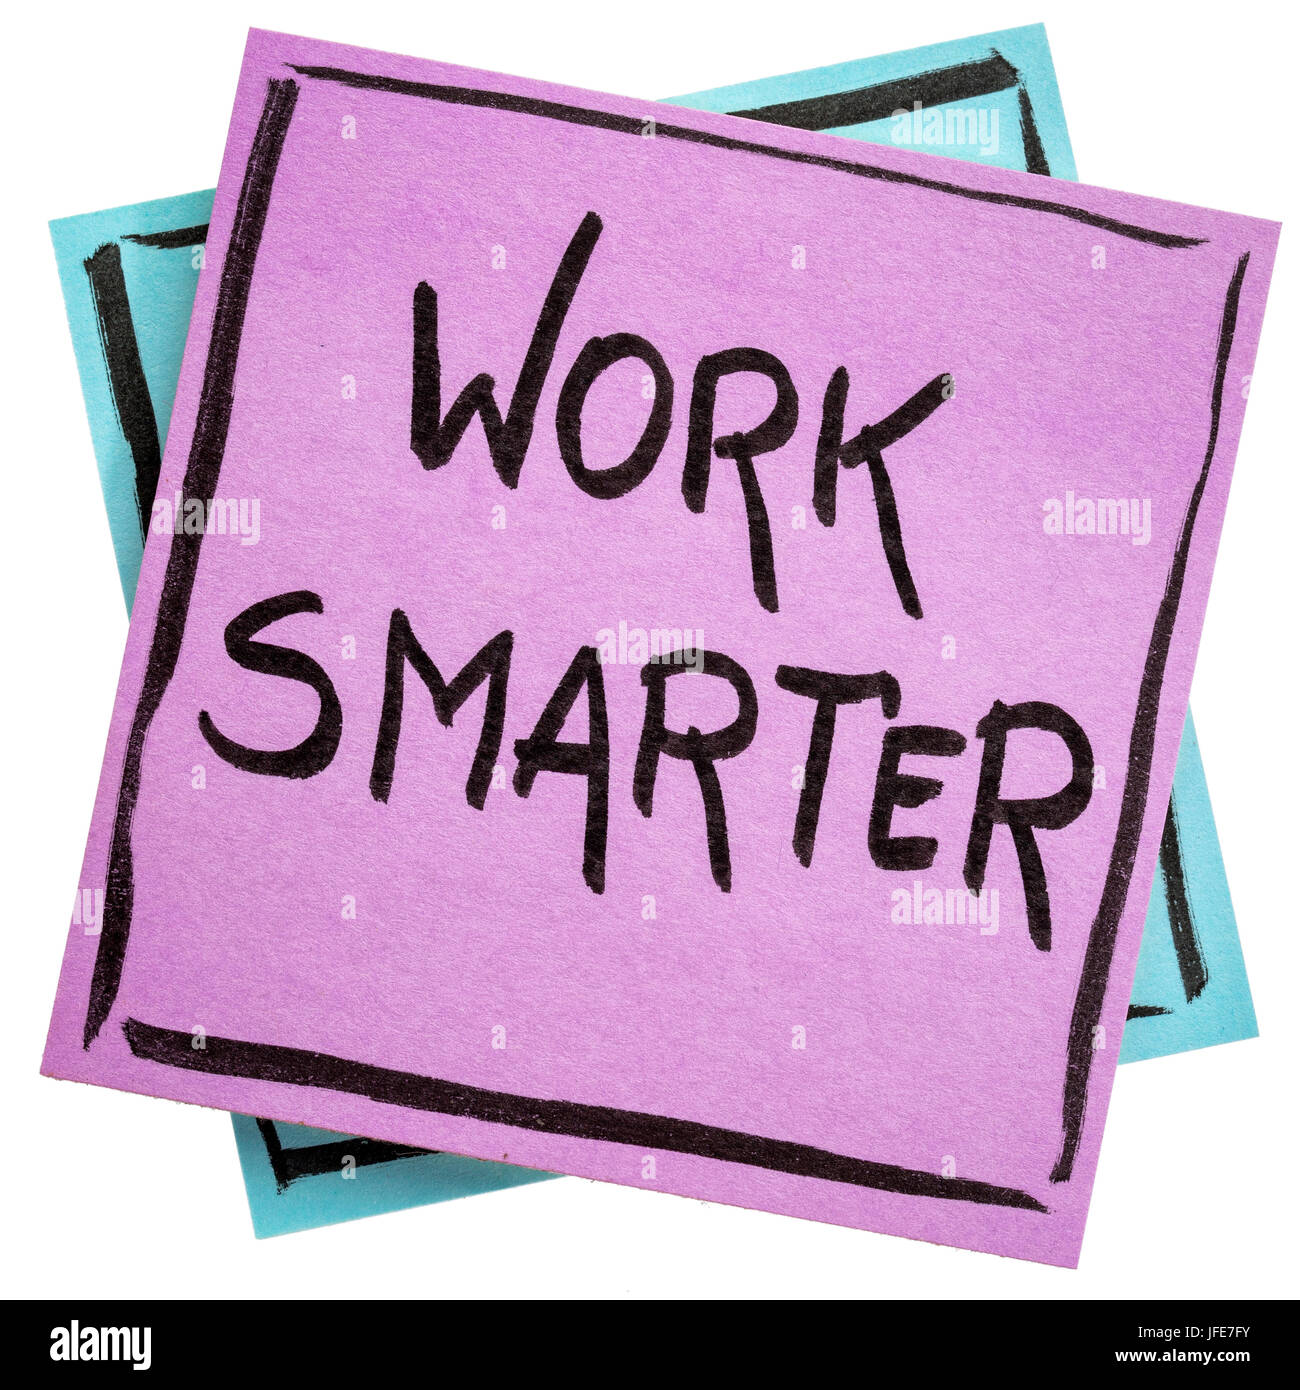 Work smarter  - handwriting in black ink on an isolated sticky note Stock Photo